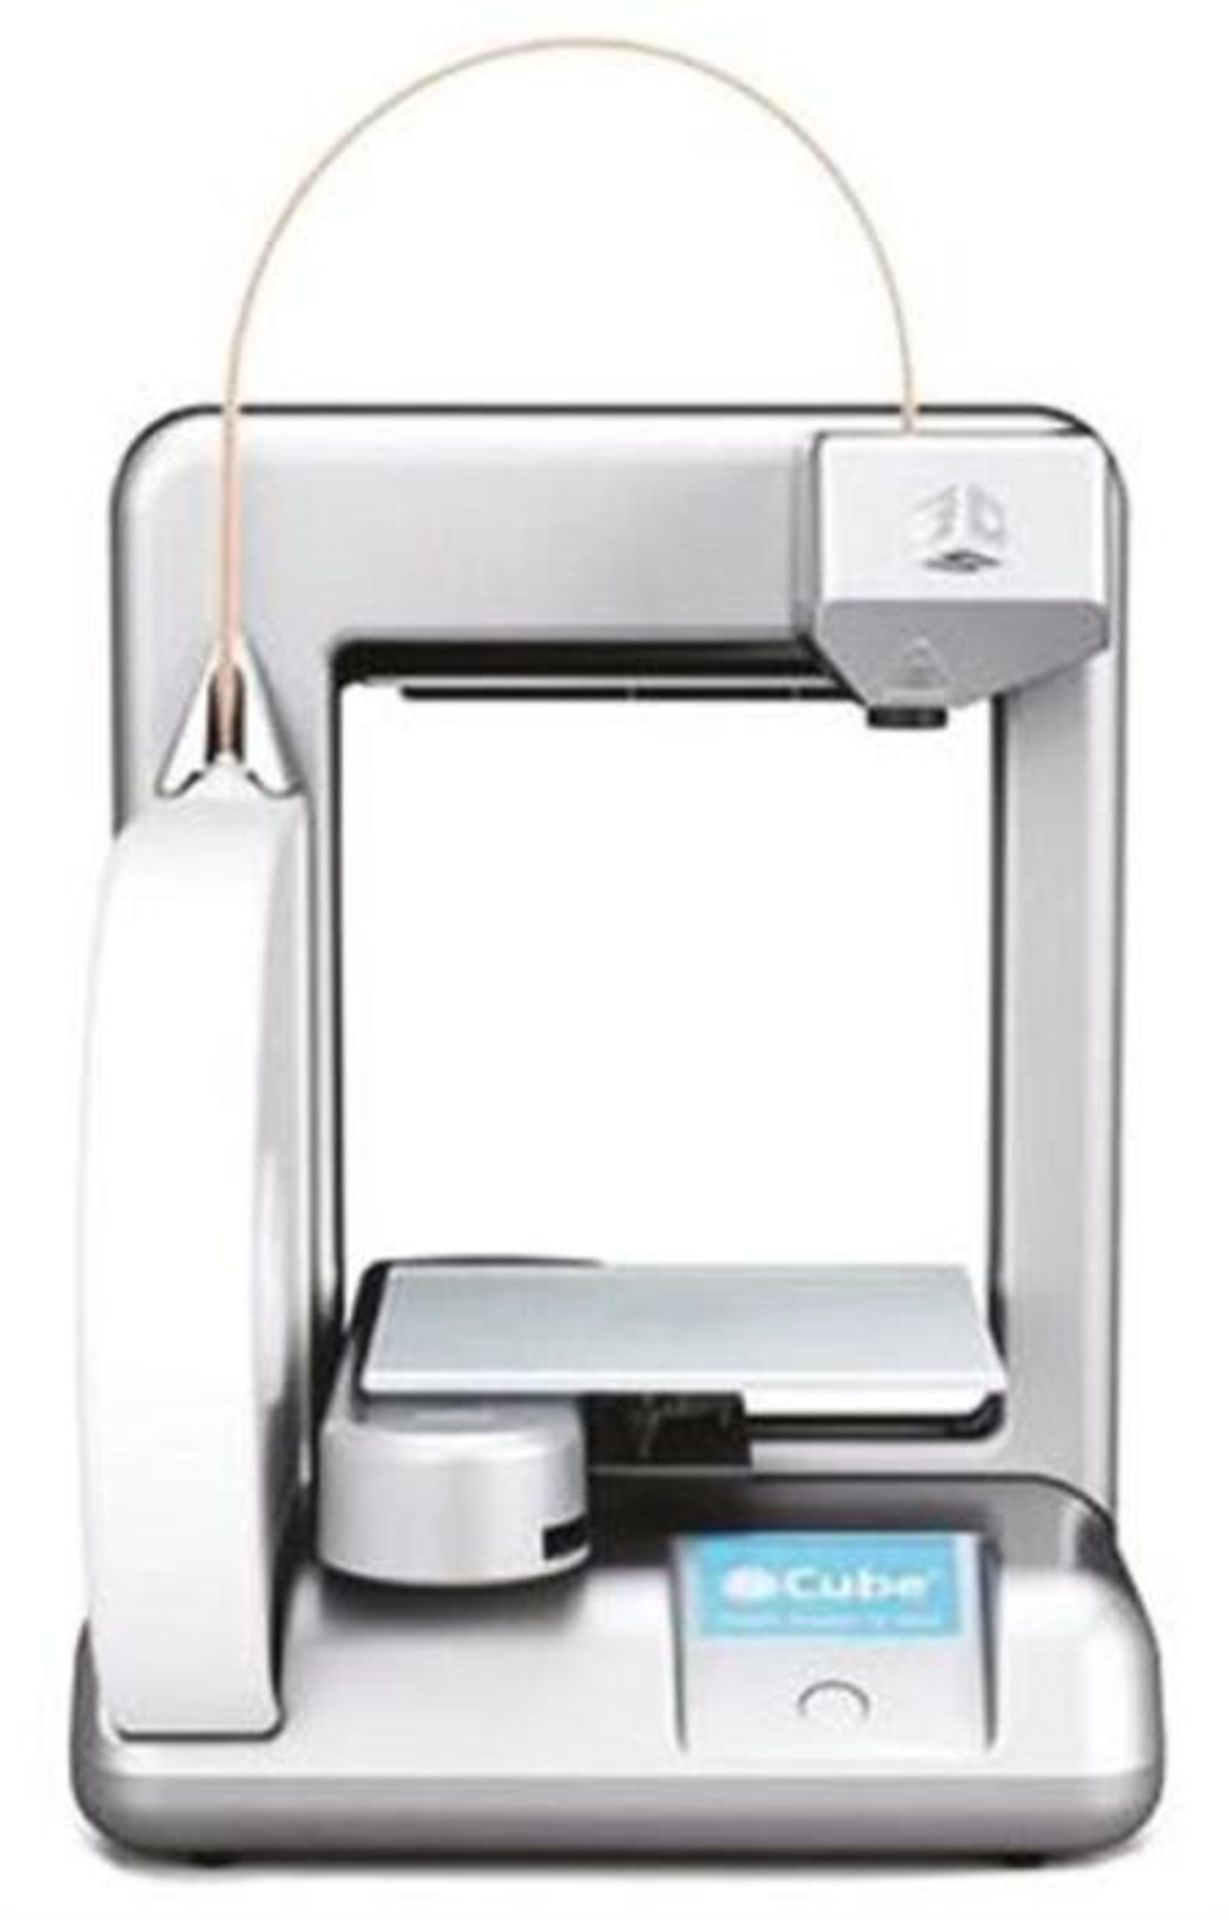 NEW & BOXED 3D Systems 2nd Gen Cube 3D Printer